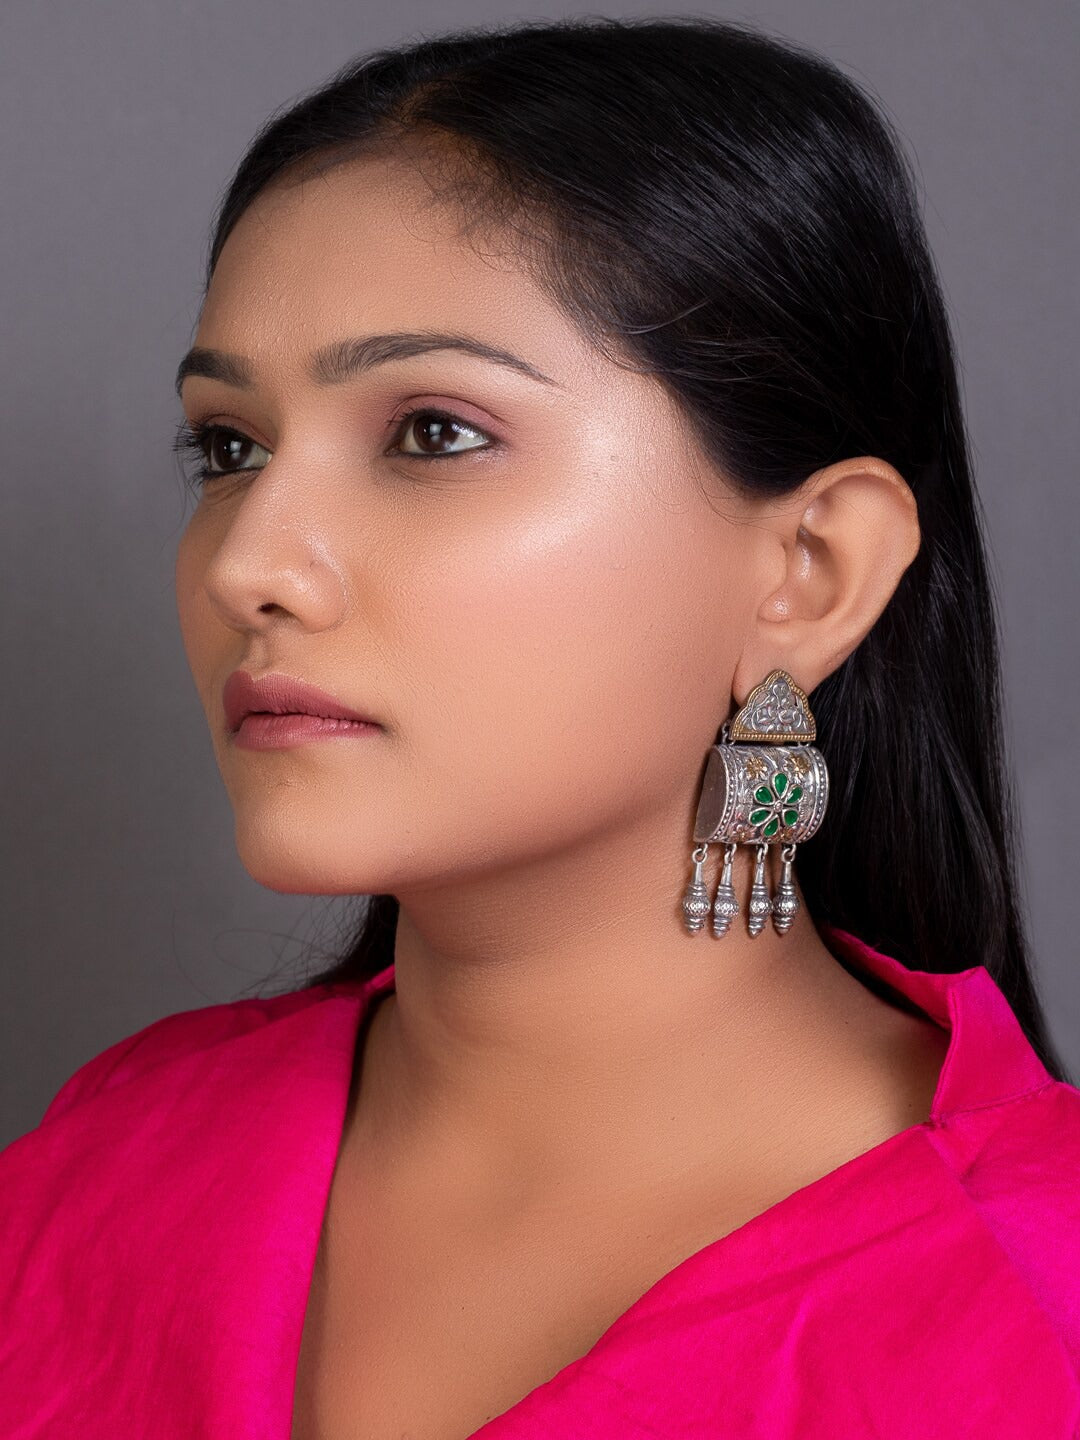 Women's Silver Plated & Green Contemporary Drop Earrings - Morkanth